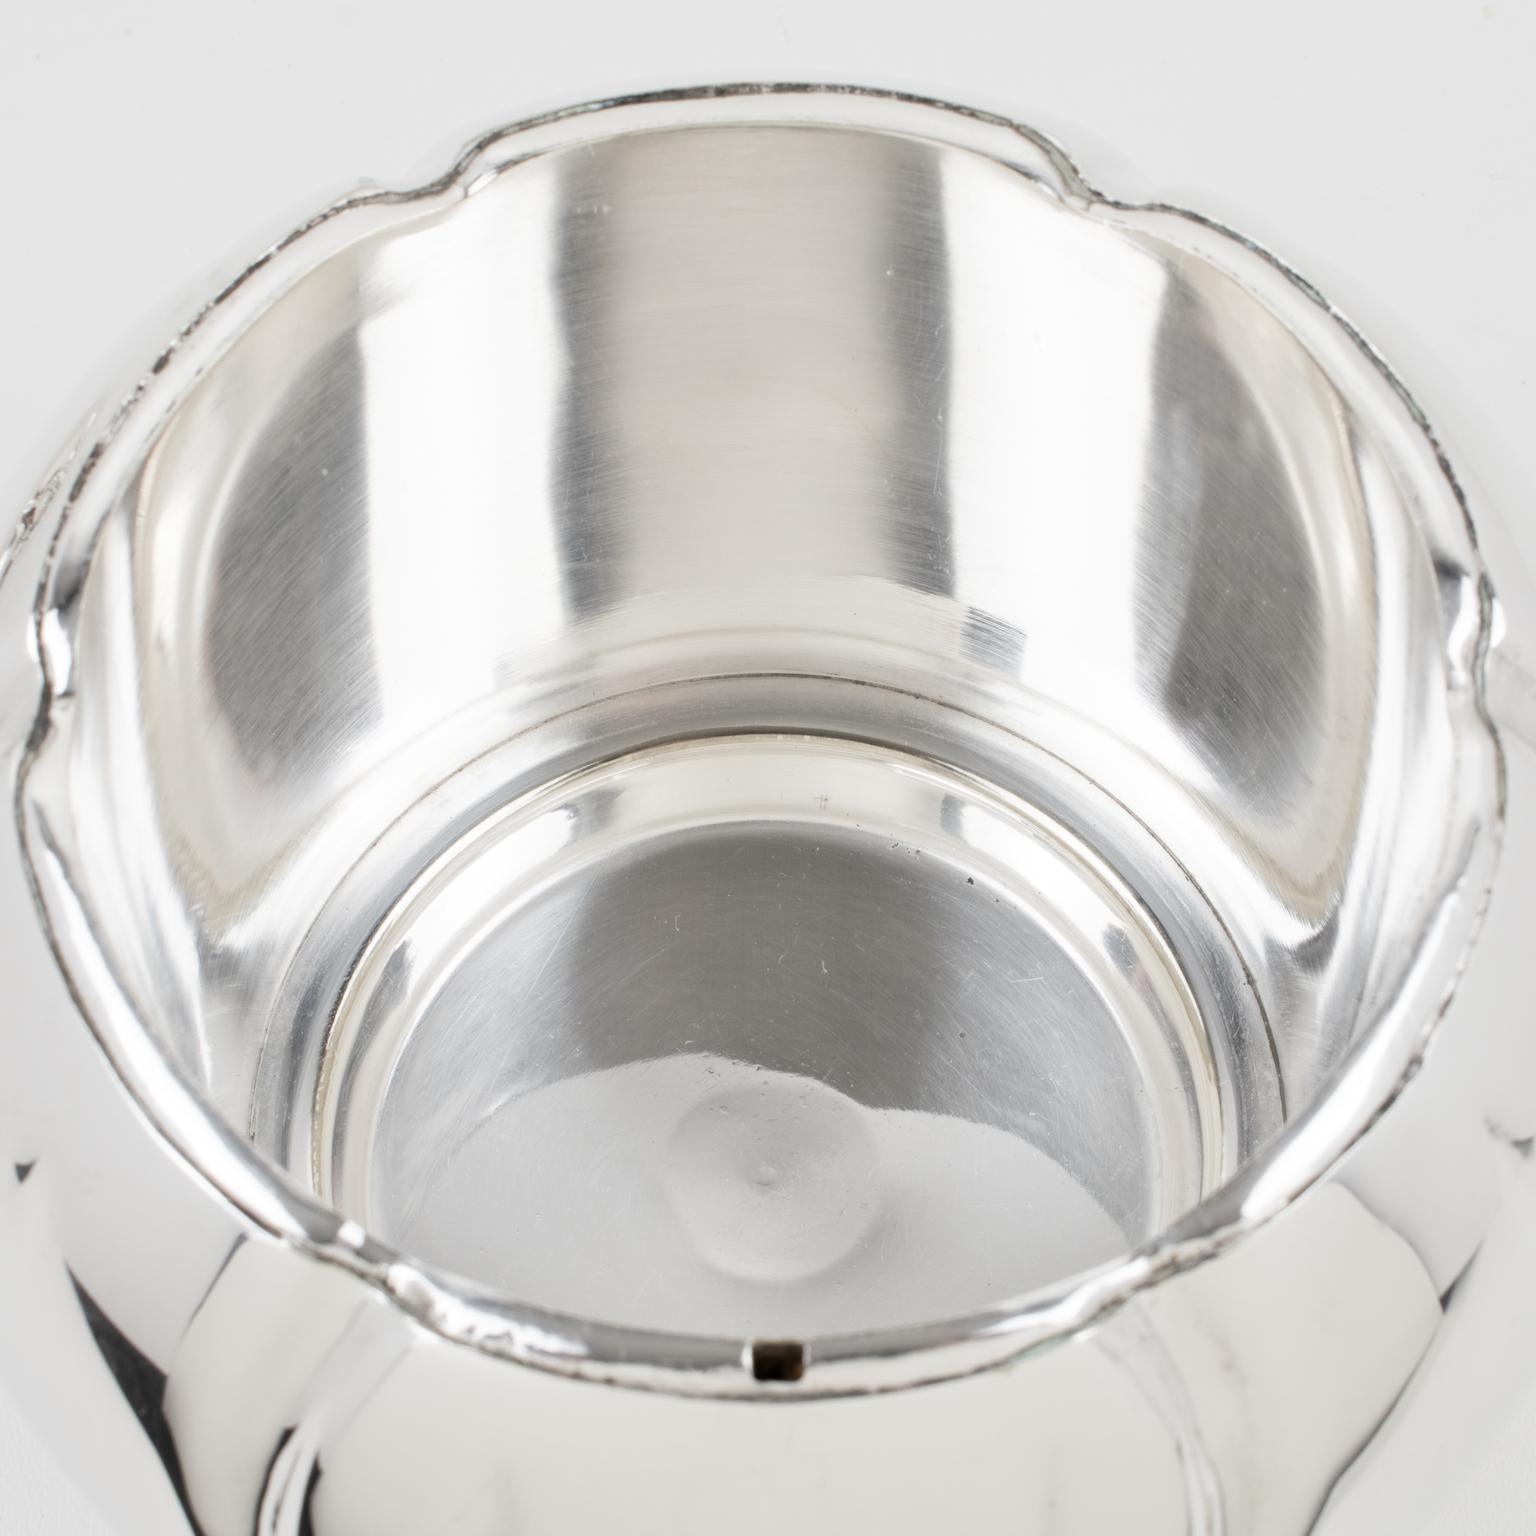 Teghini Firenze Silver Plate Tomato-shaped Ice Bucket, Italy 1960s For Sale 1